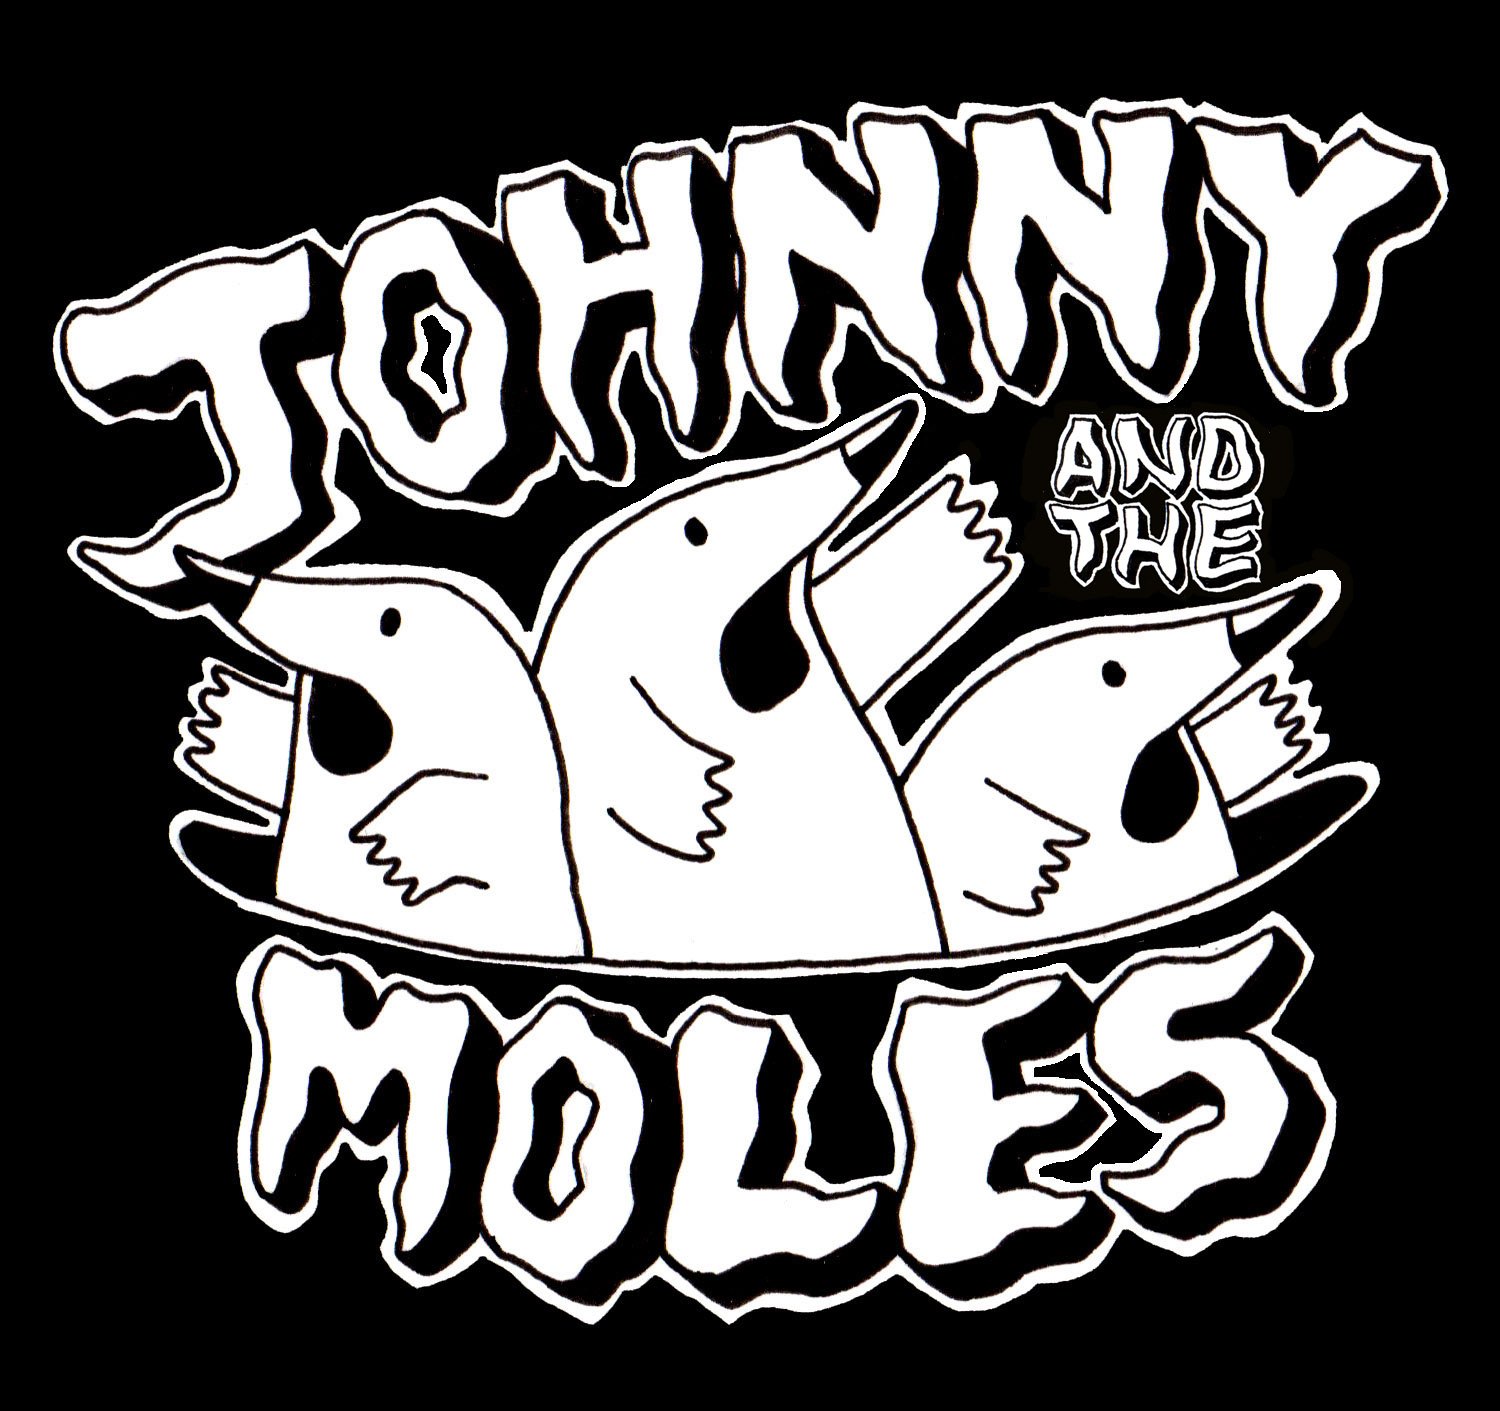 Johnny and The Moles